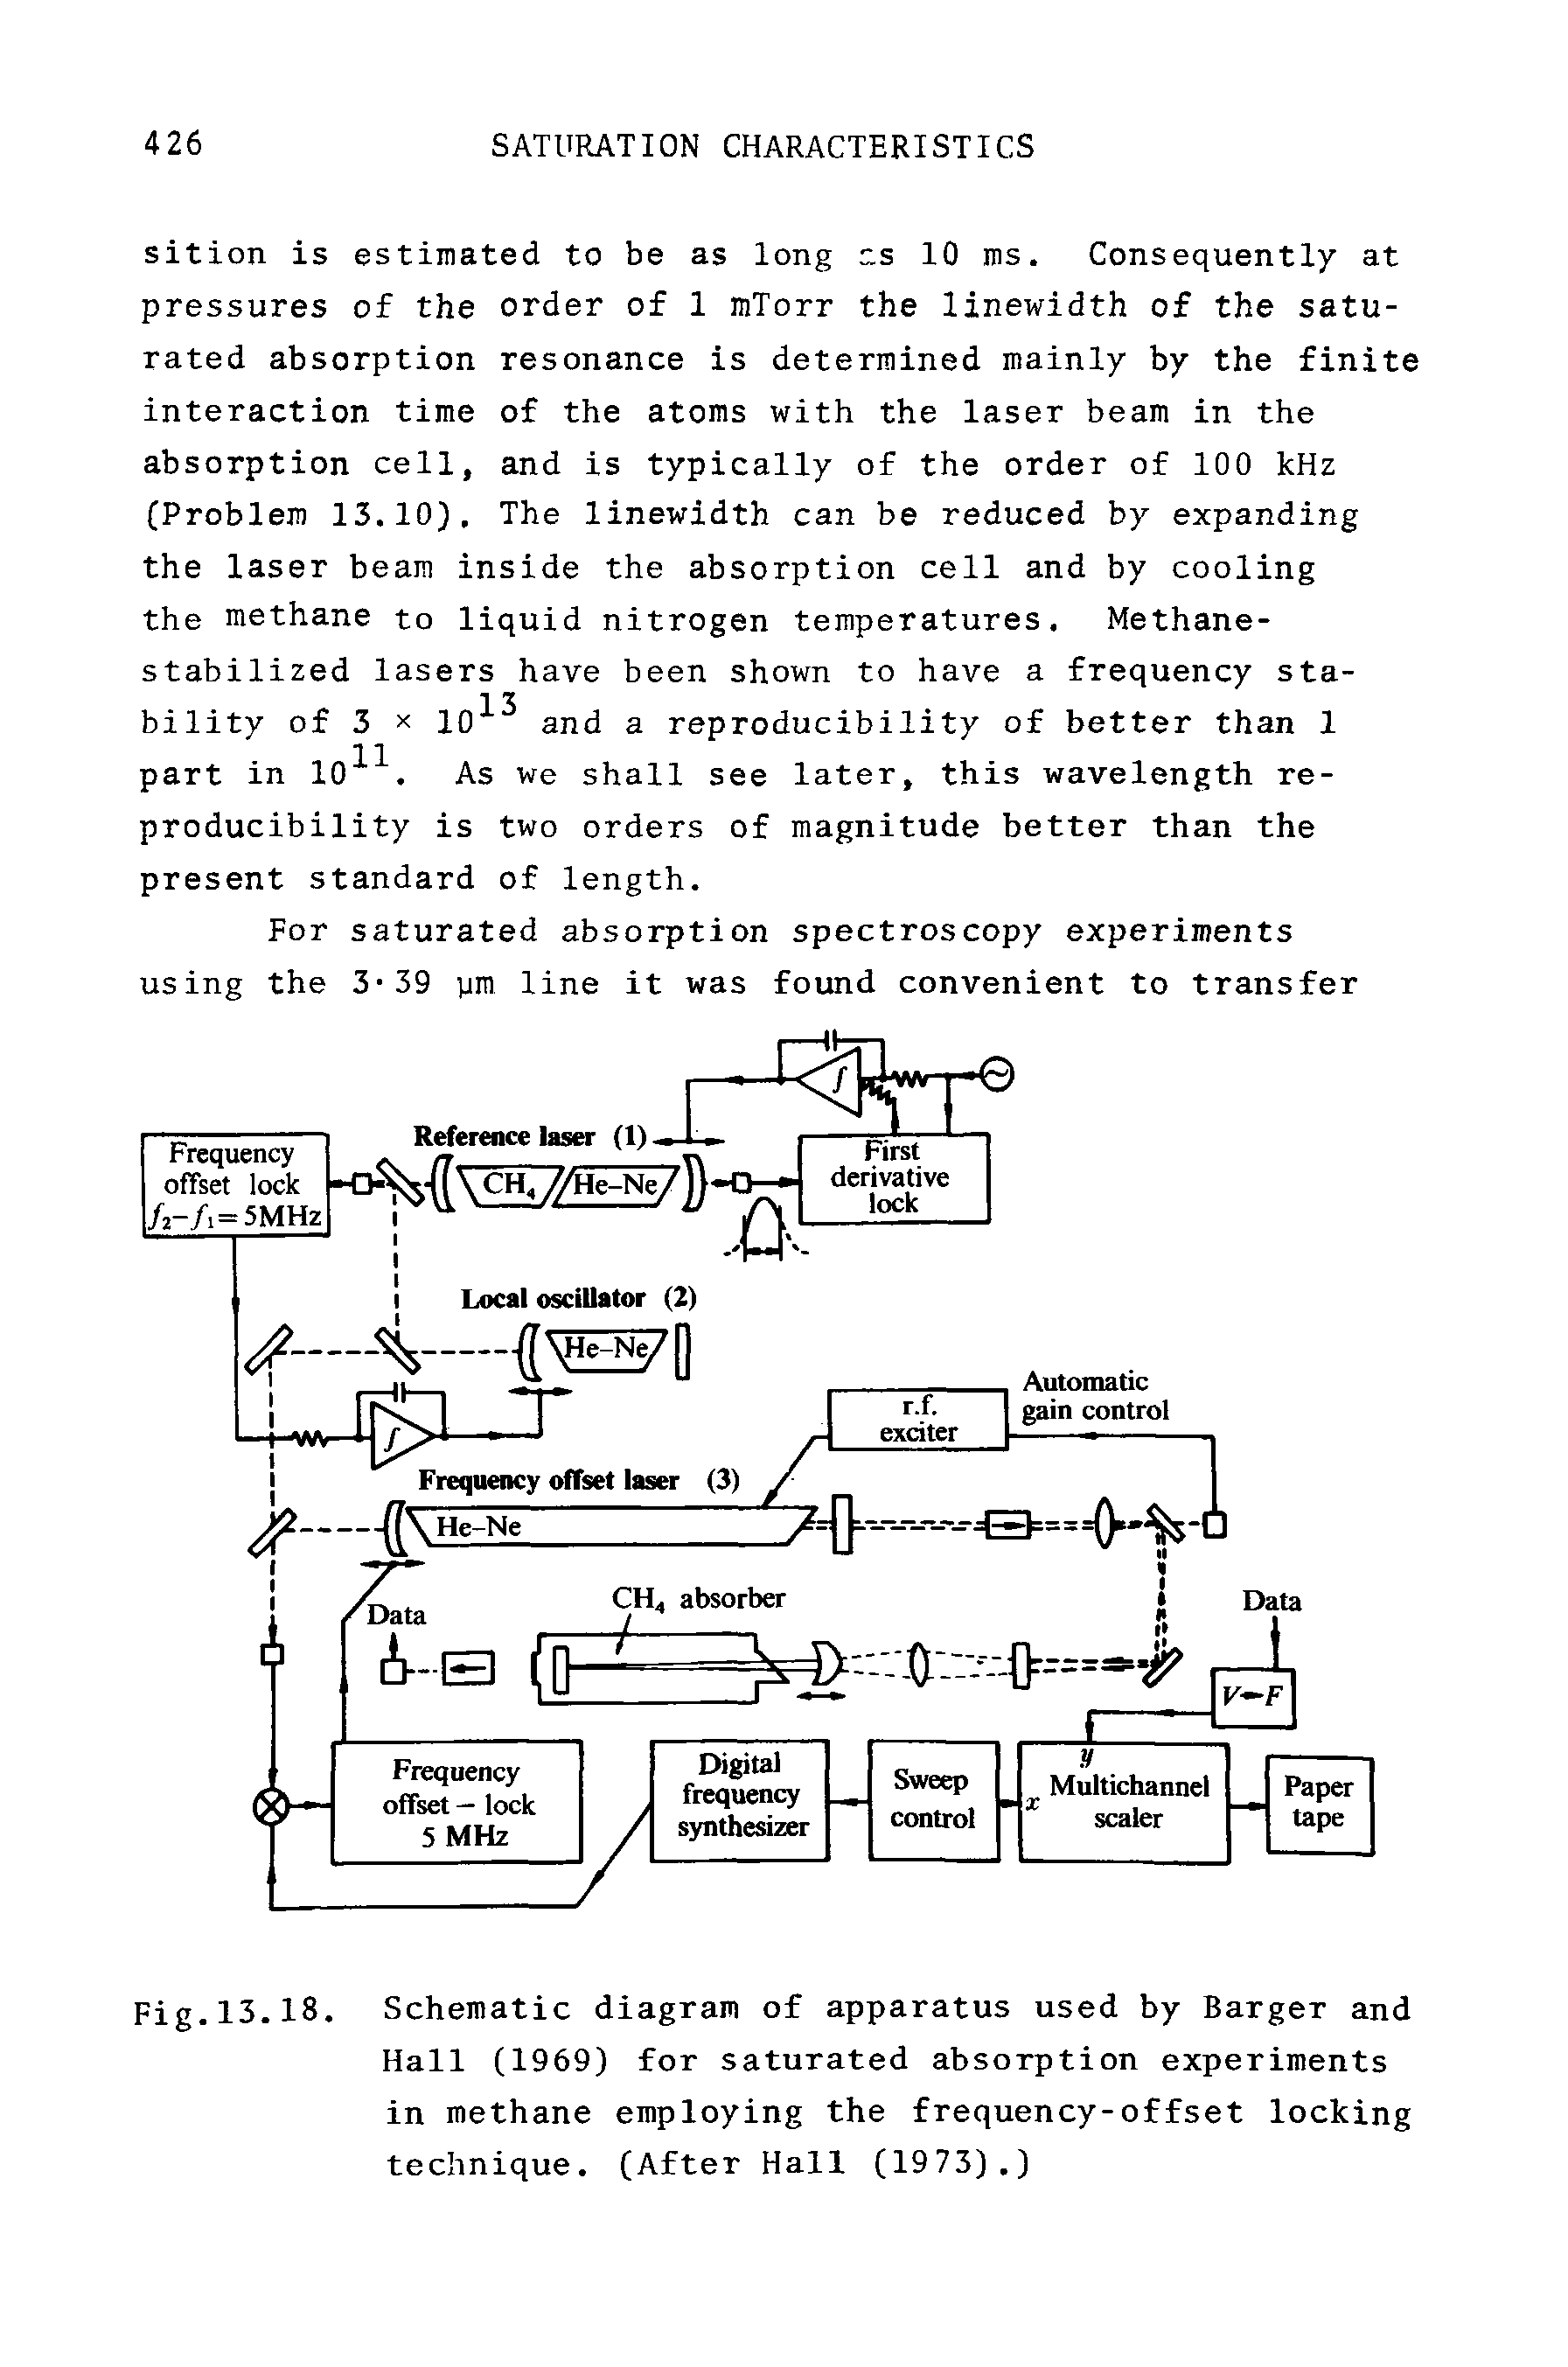 Fig.13.18. Schematic diagram of apparatus used by Barger and Hall (1969) for saturated absorption experiments in methane employing the frequency-offset locking technique. (After Hall (1973).)...